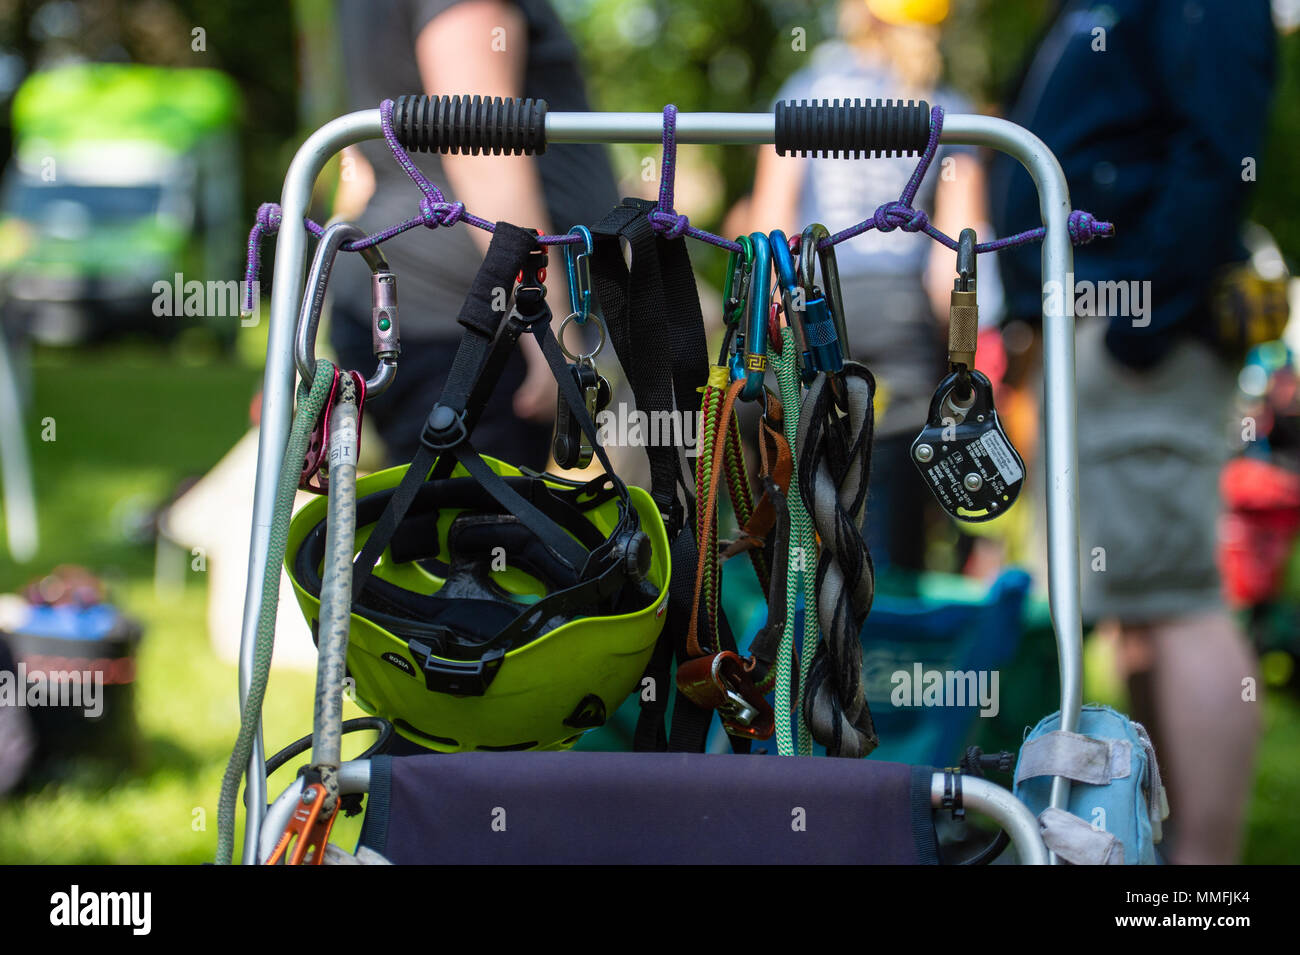 11 May 2018, Germany, Bleckede: Climbing equipment like ropes, helmets and hooks can be seen at the 25th German Tree Climbing Championship. The competition runs until 13 May and features 60 climbers. Tree climbers are needed wherever ladders and platforms can't reach. Photo: Philipp Schulze/dpa Stock Photo